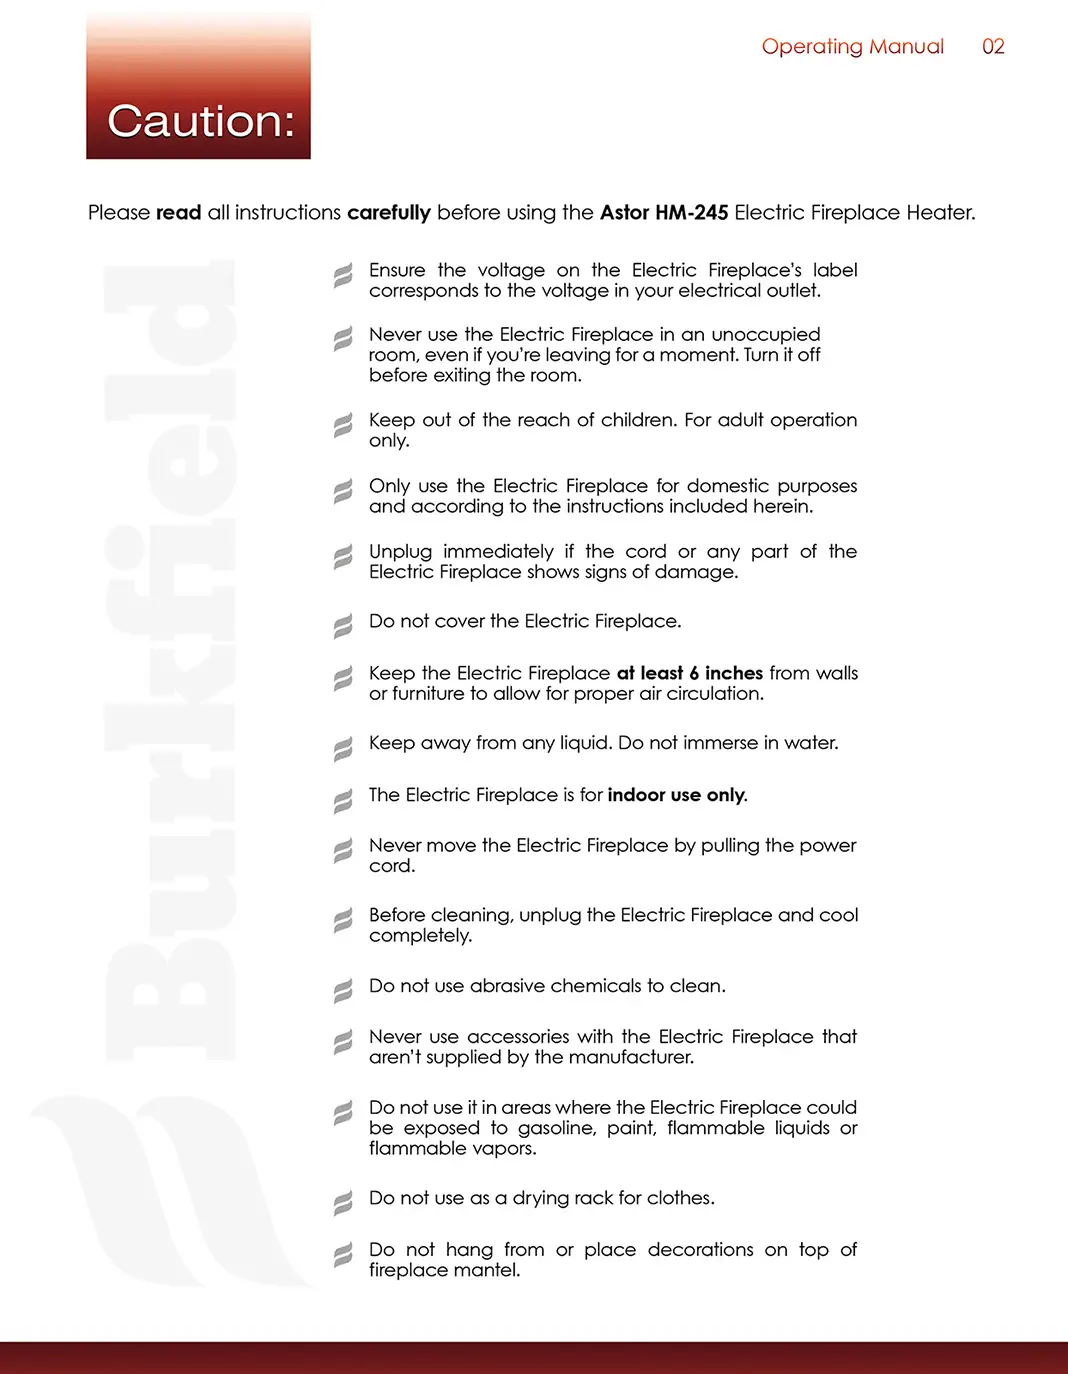 Burkfield Astor HM-245 Operating Manual: Page #2: Caution